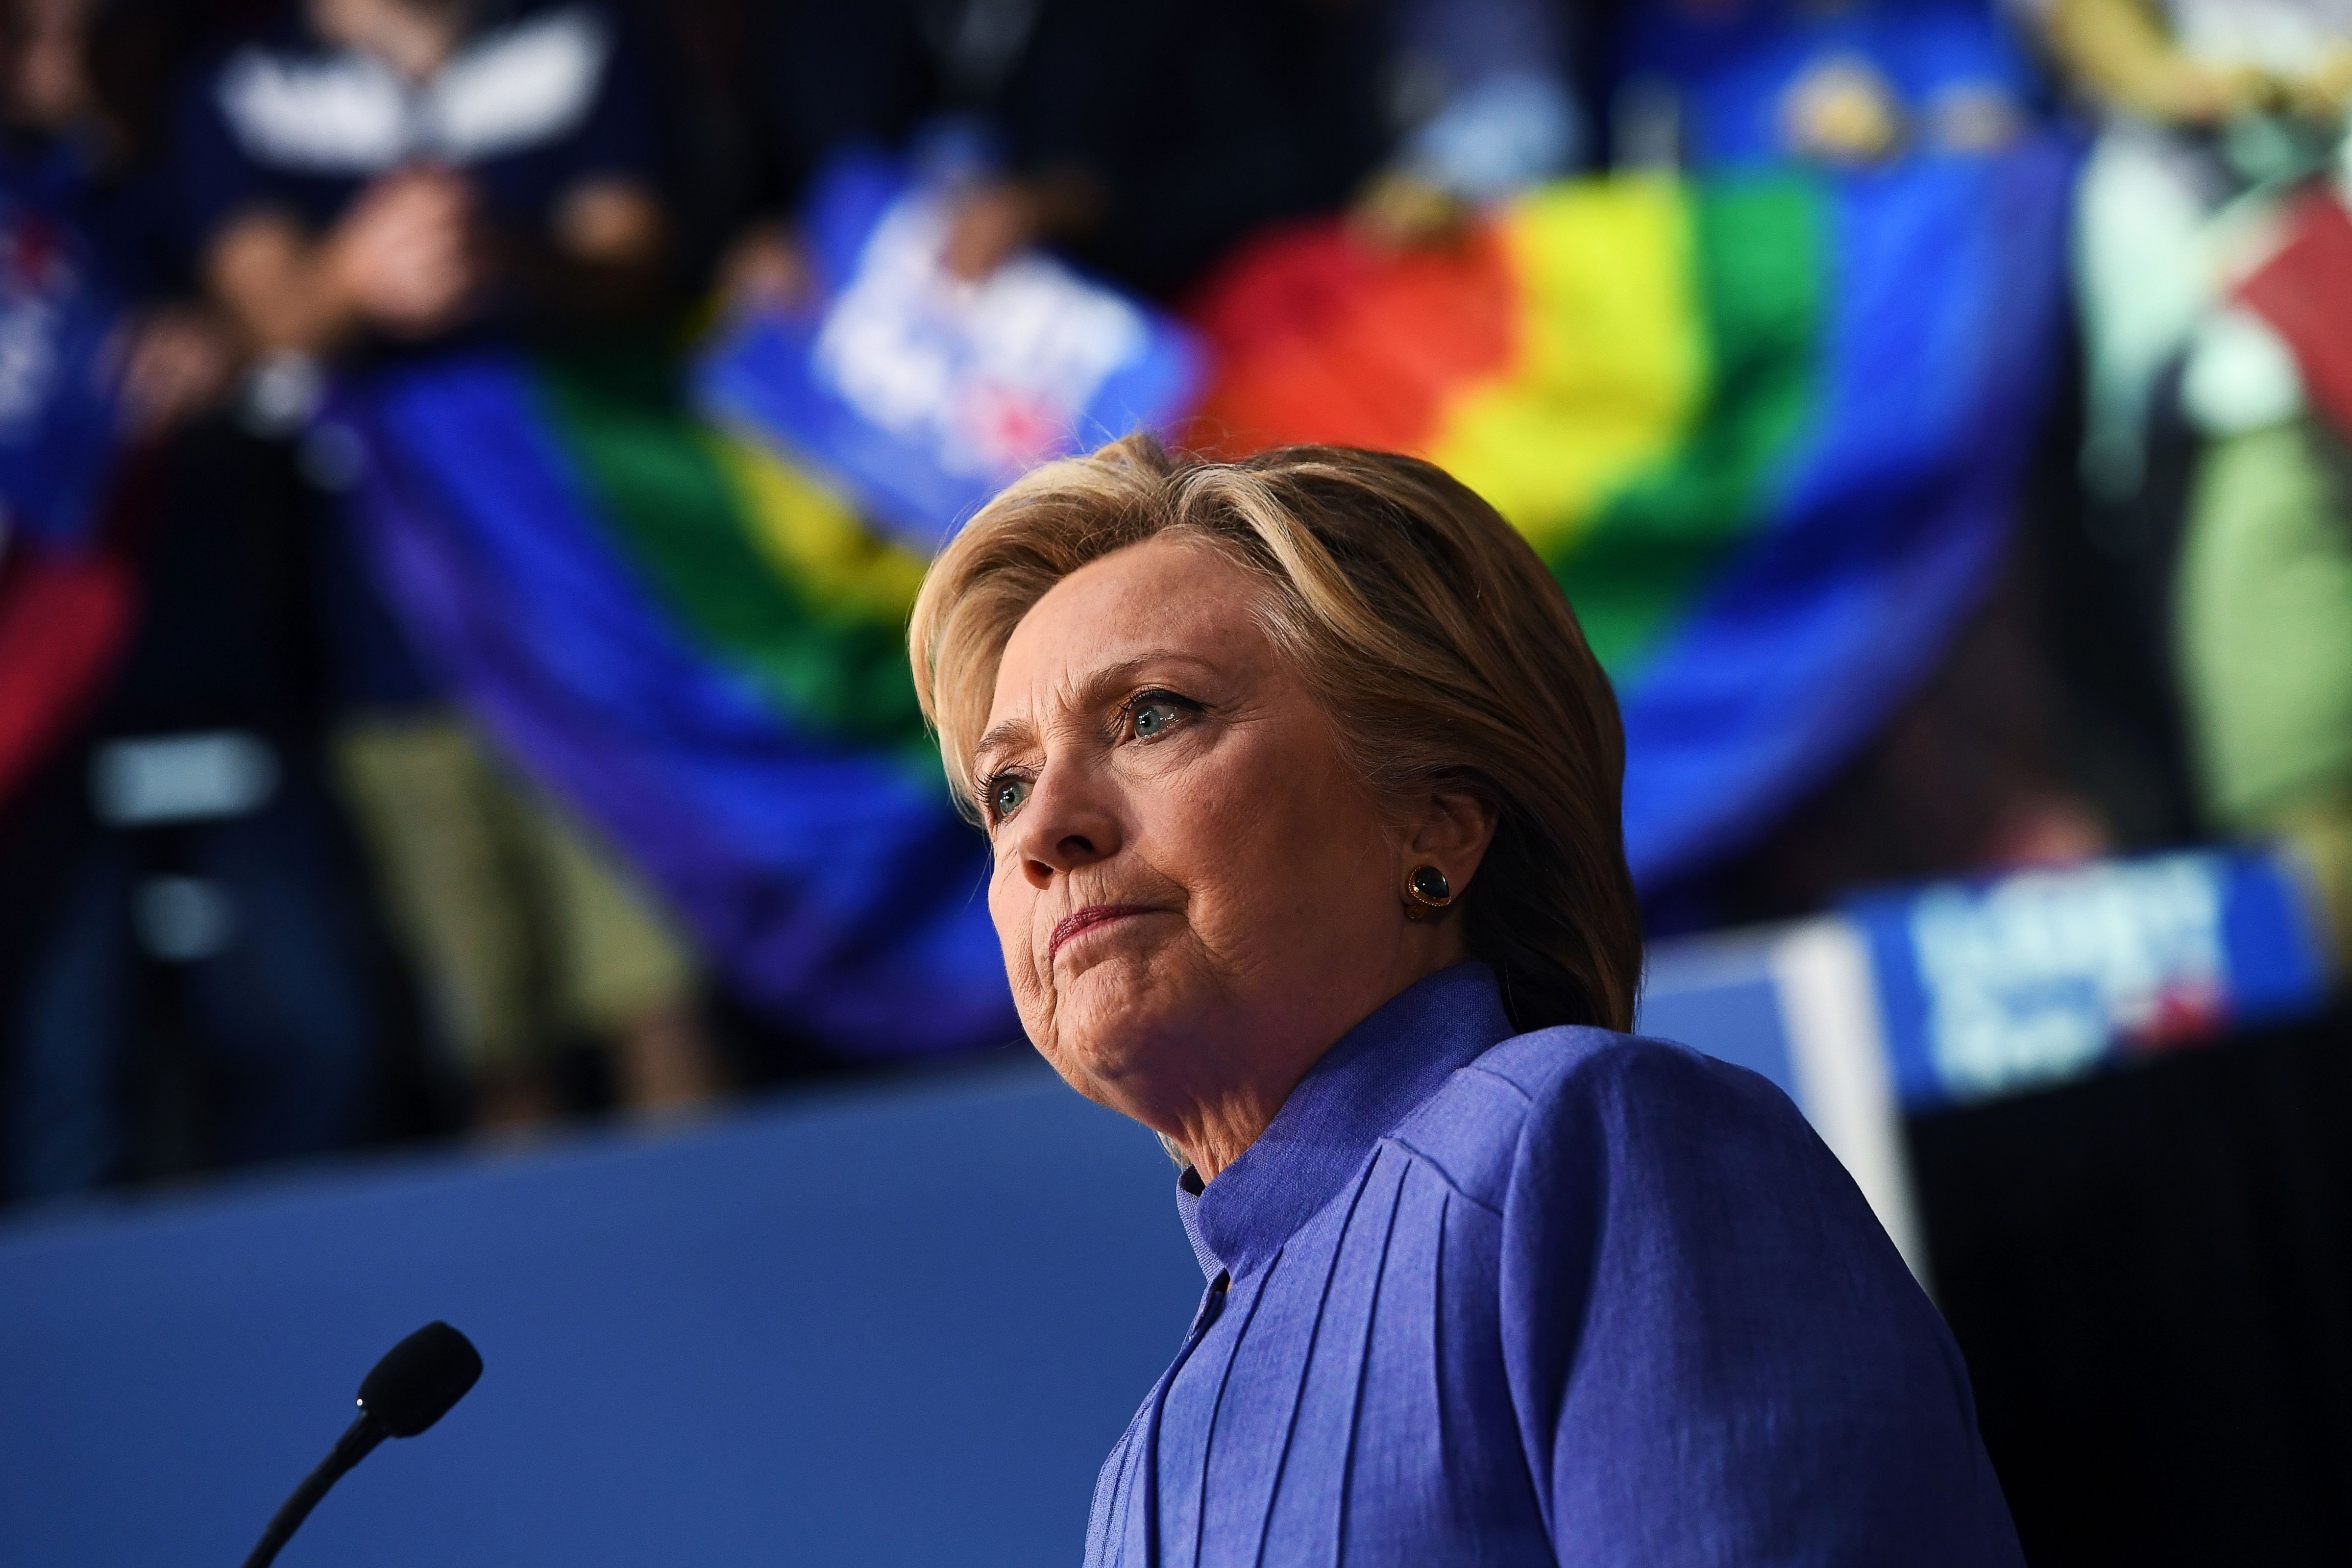 U.S. Democratic presidential nominee Hillary Clinton speaks at a Community in Unity rally in Wilton Manors, Florida, on Oct. 30, 2016. (Jewel Samad—AFP/Getty Images)